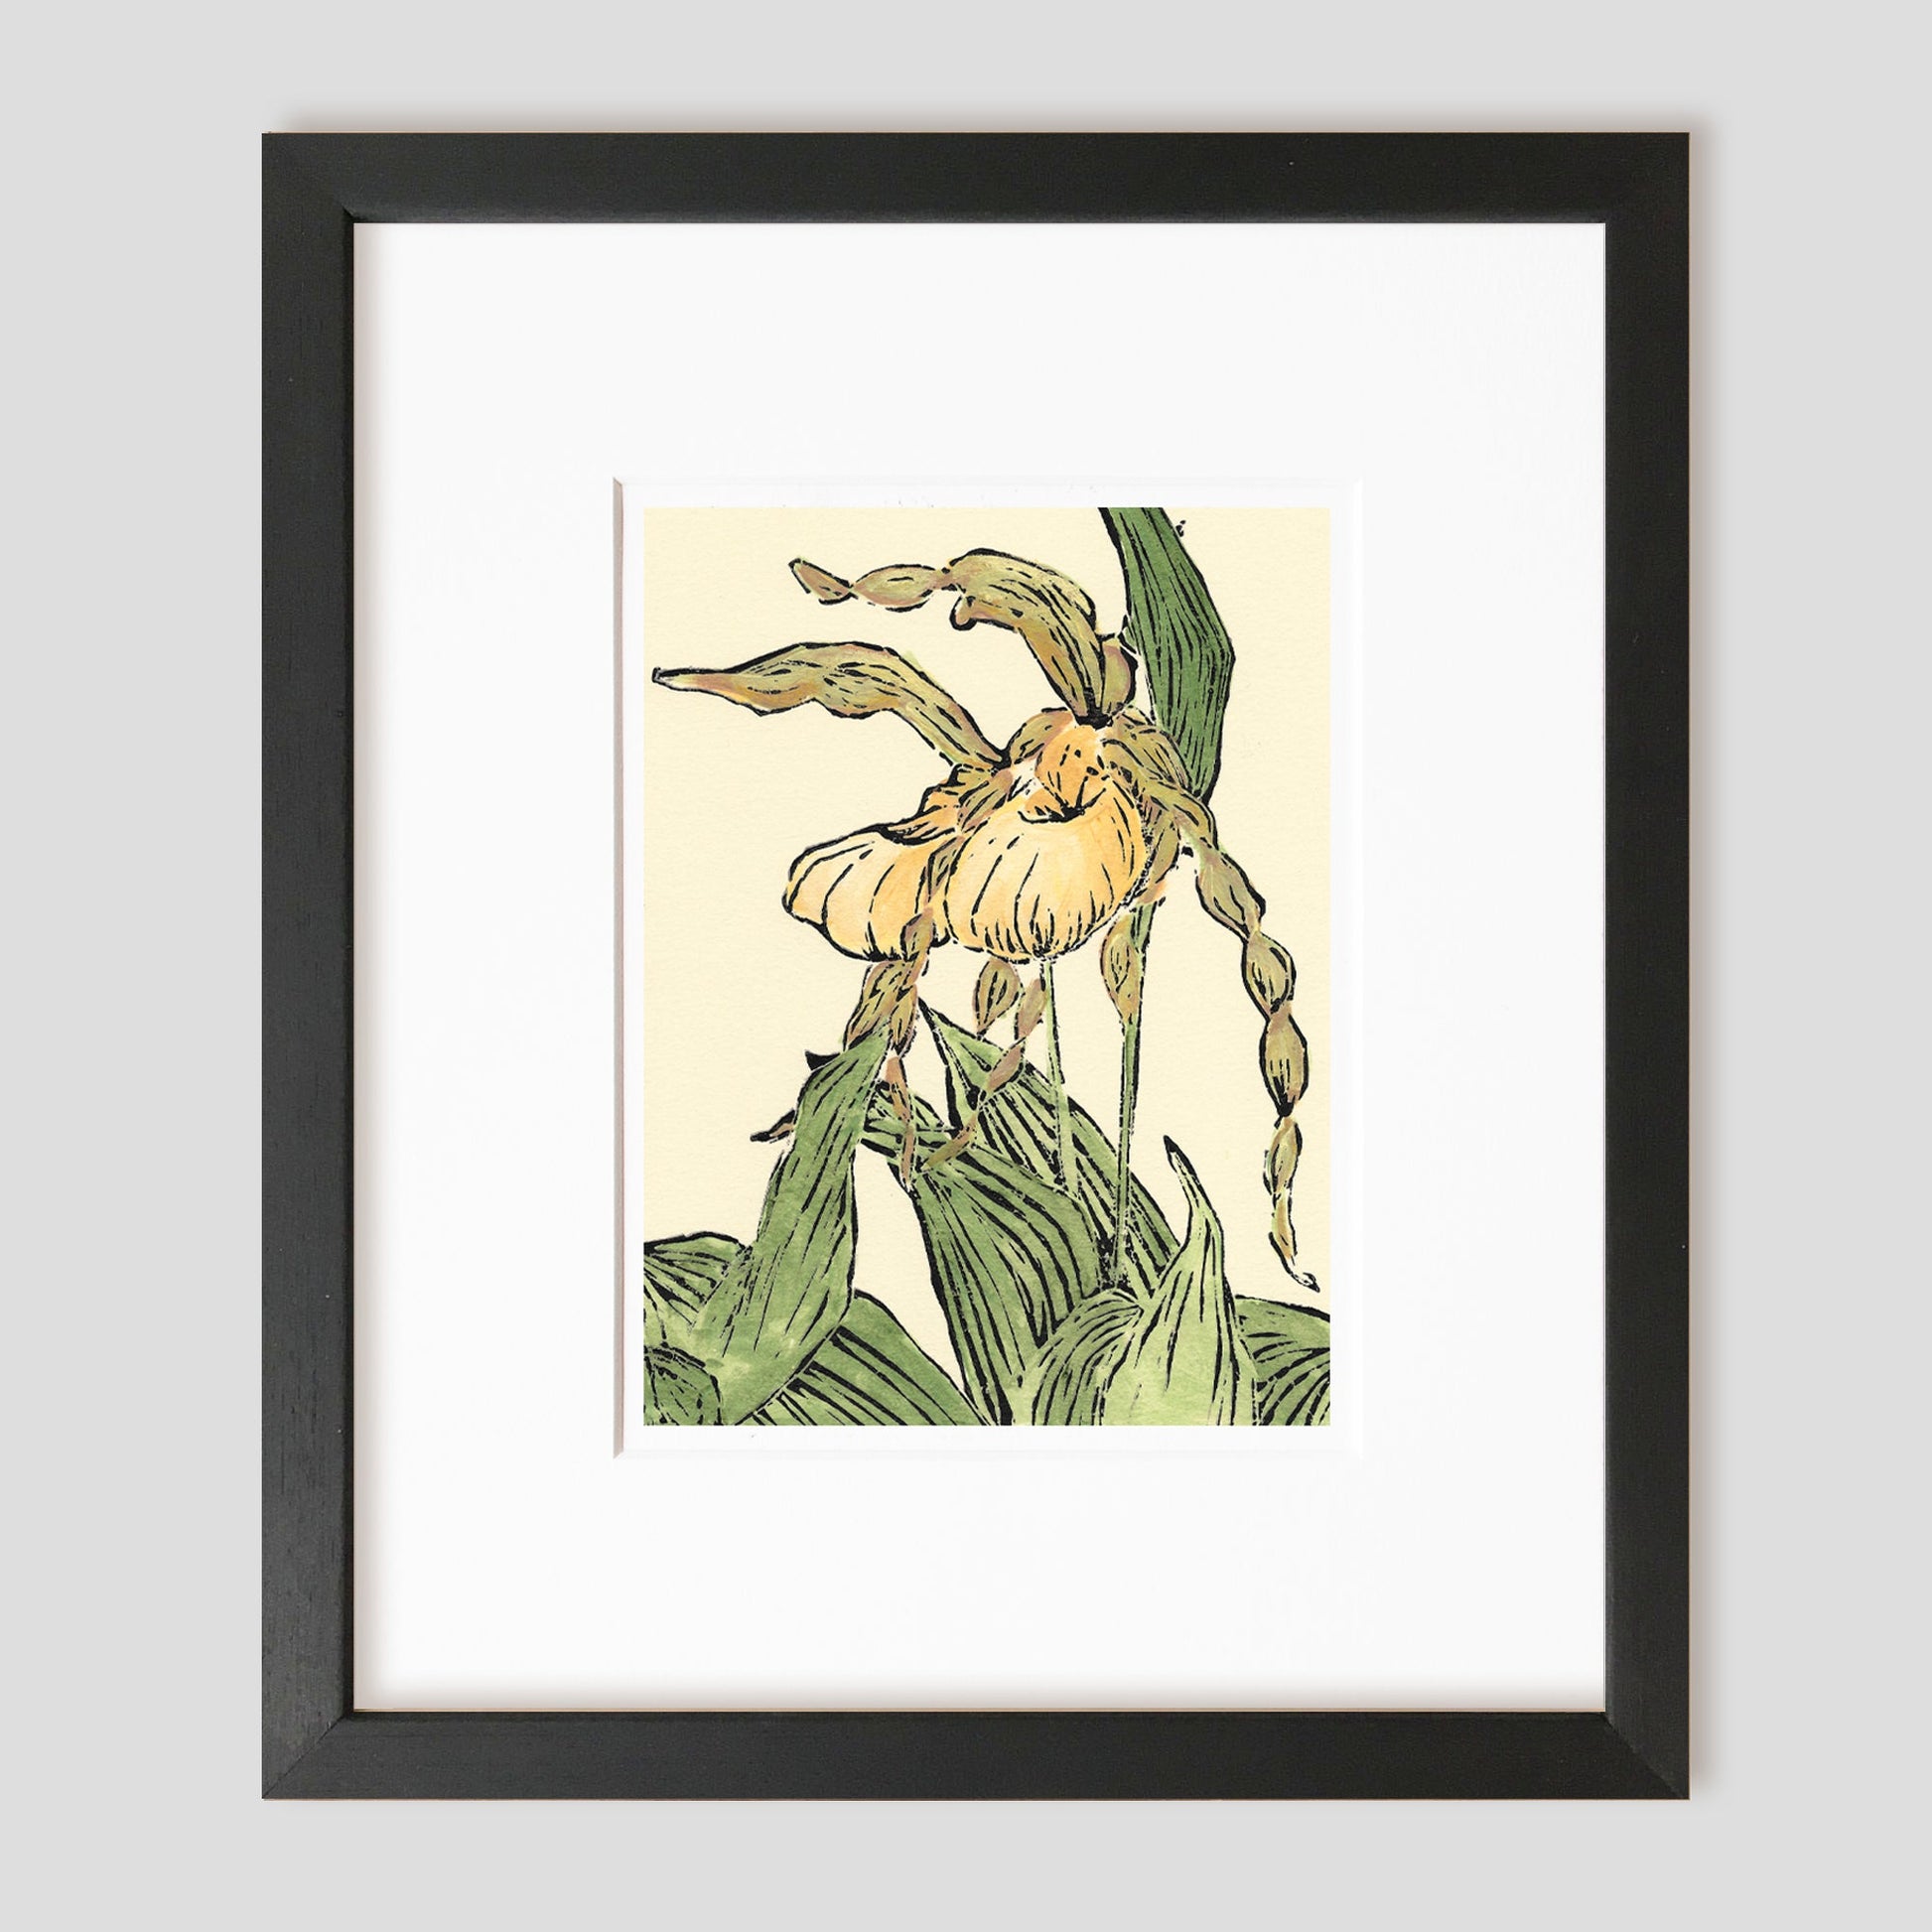 Botanical art titled Lady Slipper Pair, a multicolor linoleum block print of one of Michigan's most delightful native orchid wildflowers by Natalia Wohletz of Peninsula Prints, Milford & Mackinac Island.